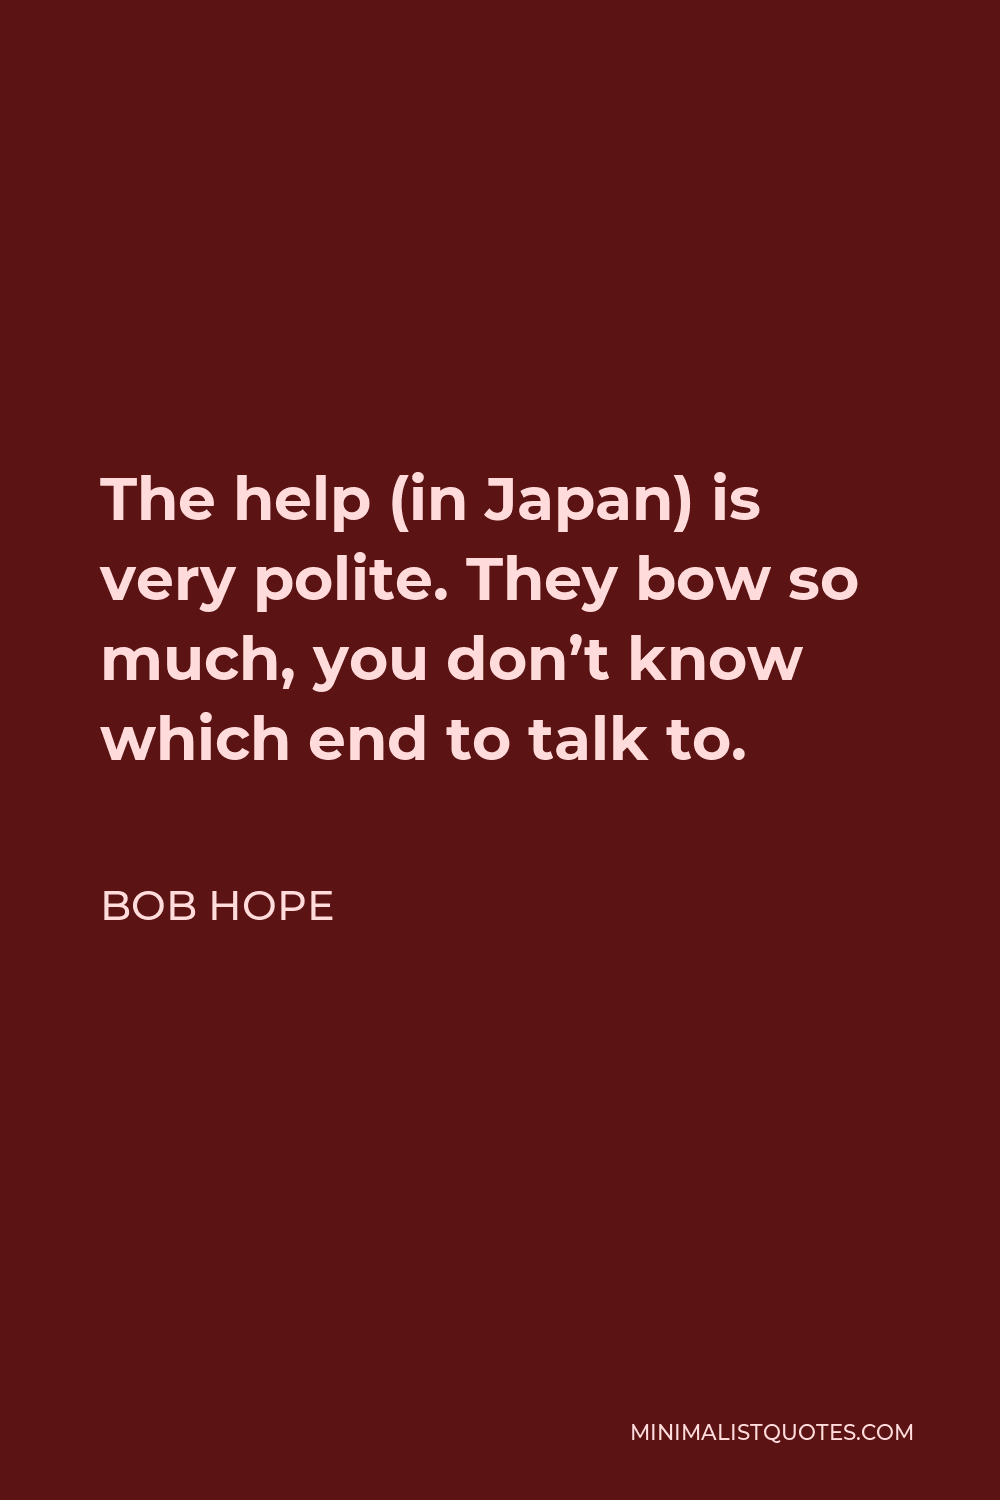 Bob Hope Quote - The help (in Japan) is very polite. They bow so much, you don’t know which end to talk to.